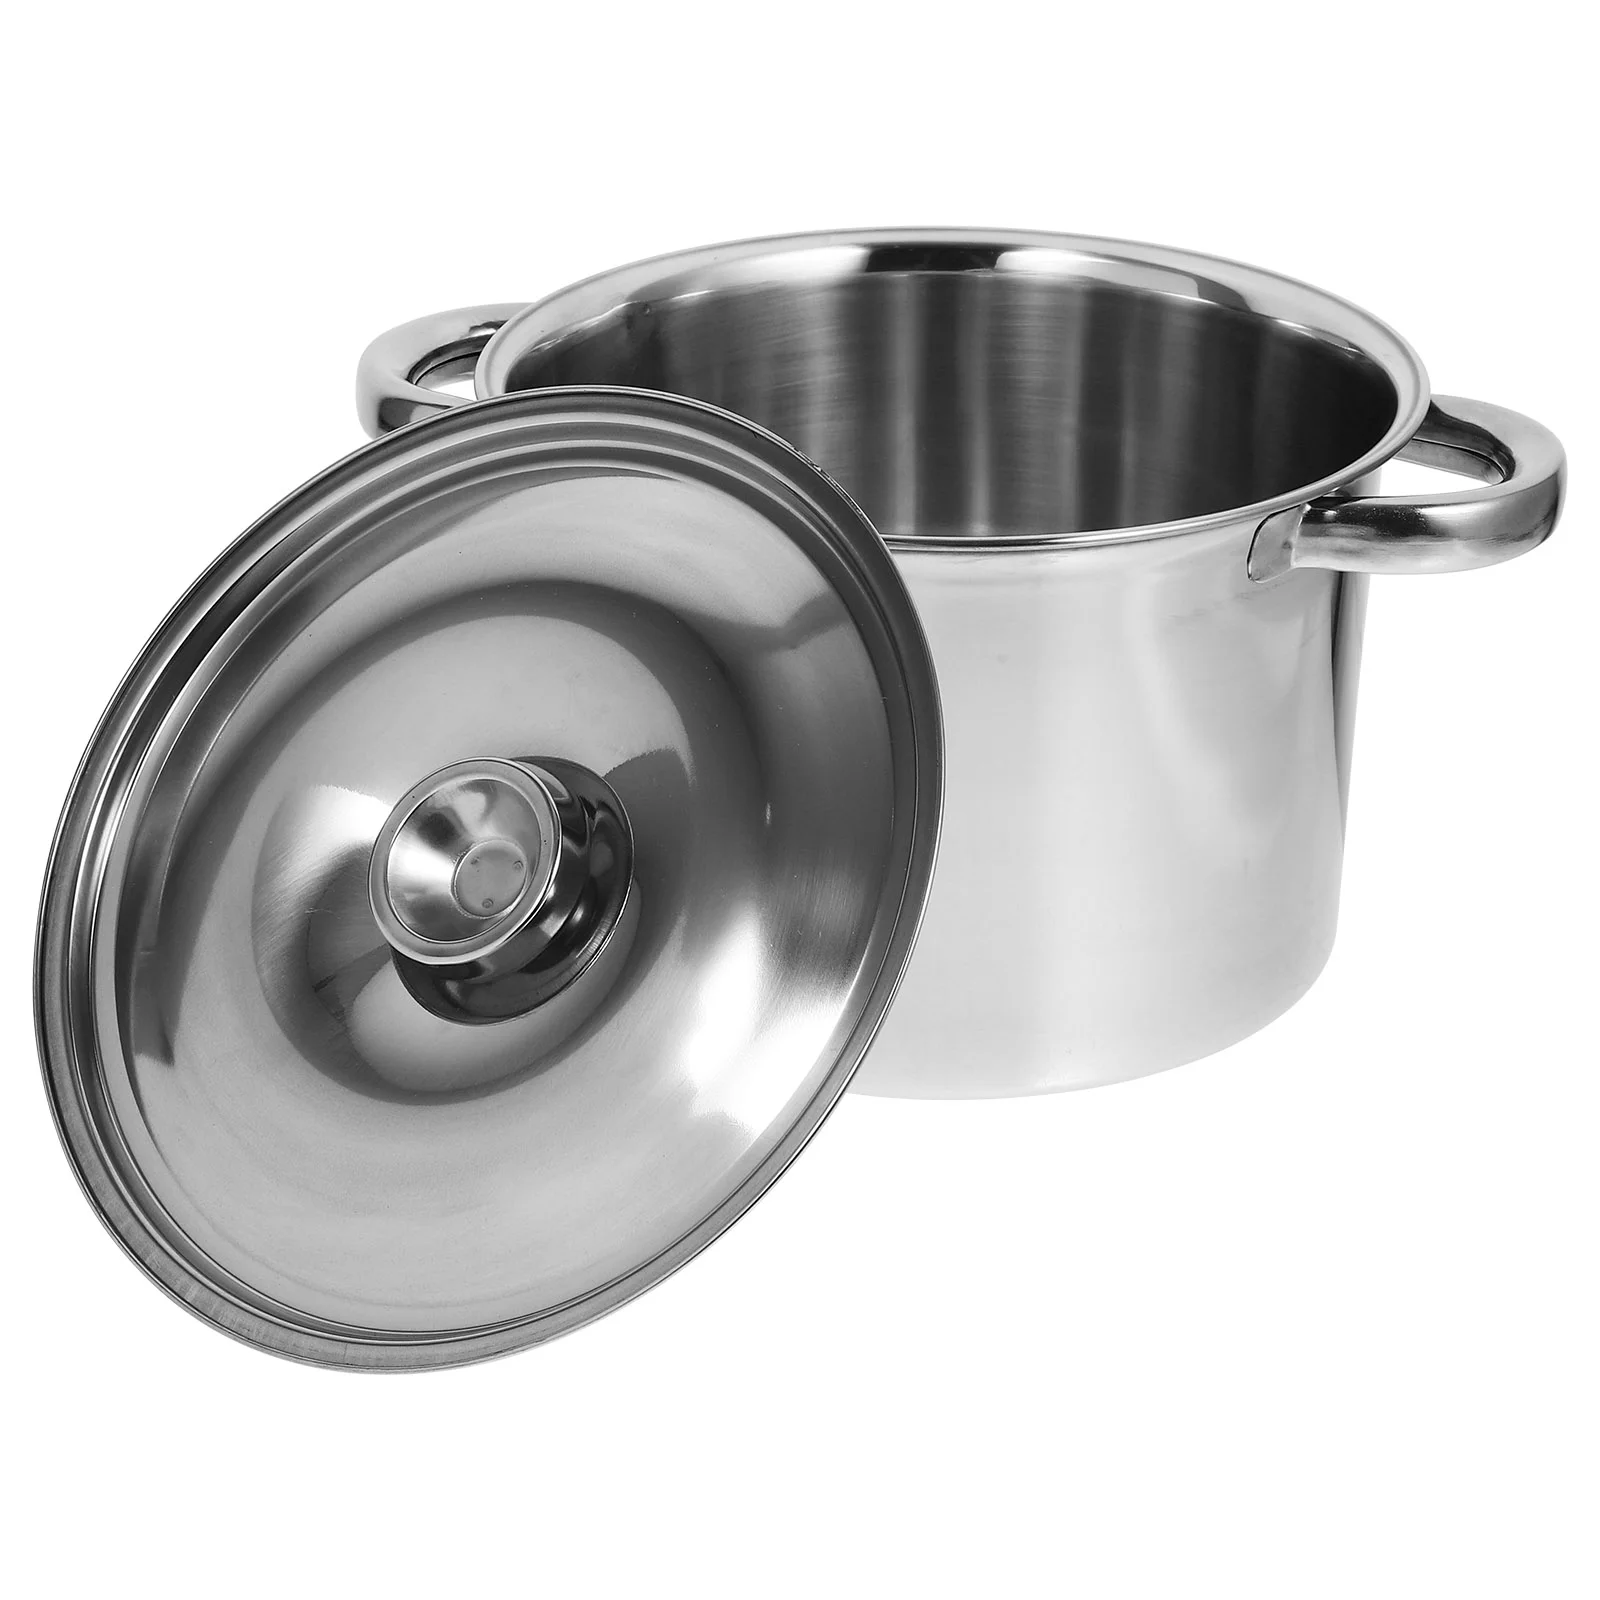 

Covered Stockpot Multipurpose Cooking Stainless Steel Stew Cookware Oil Storage Soup Boiling Metal